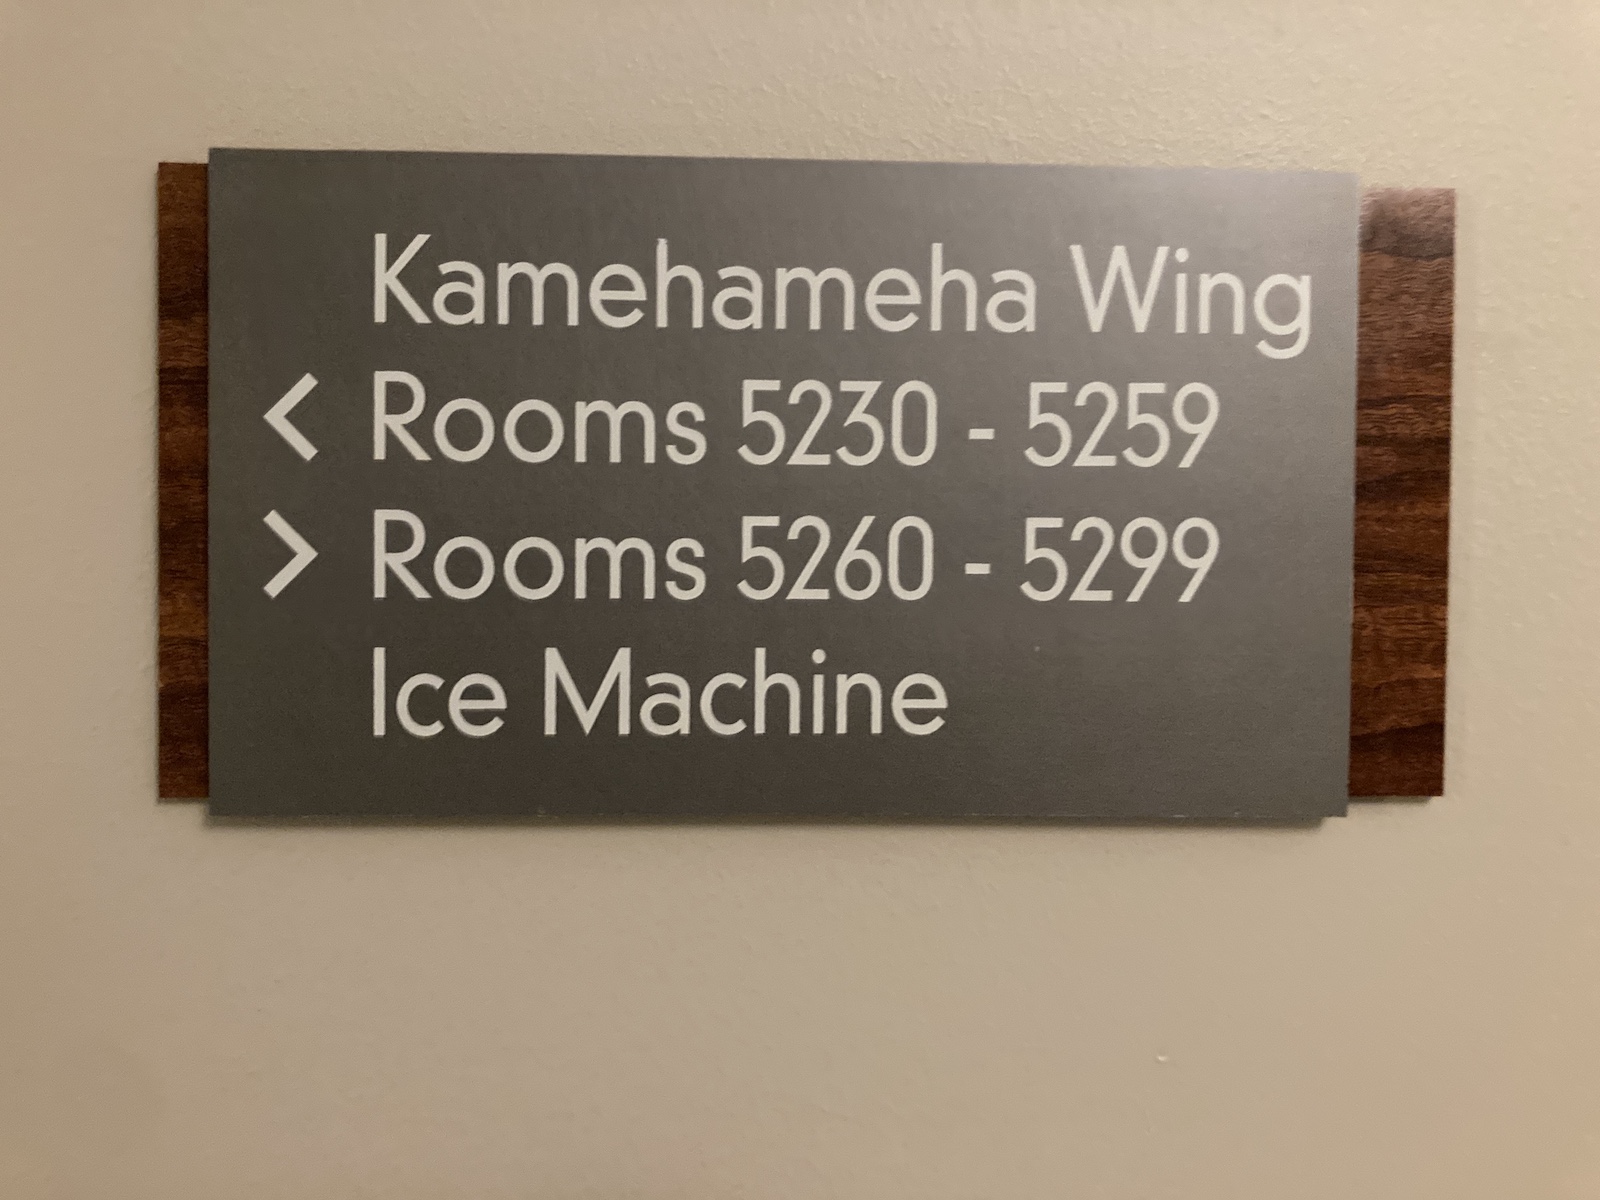 Photo of directional sign to find your room on the 5th floor of Kamehameha Wing at the Waikoloa Beach Marriott Resort Spa